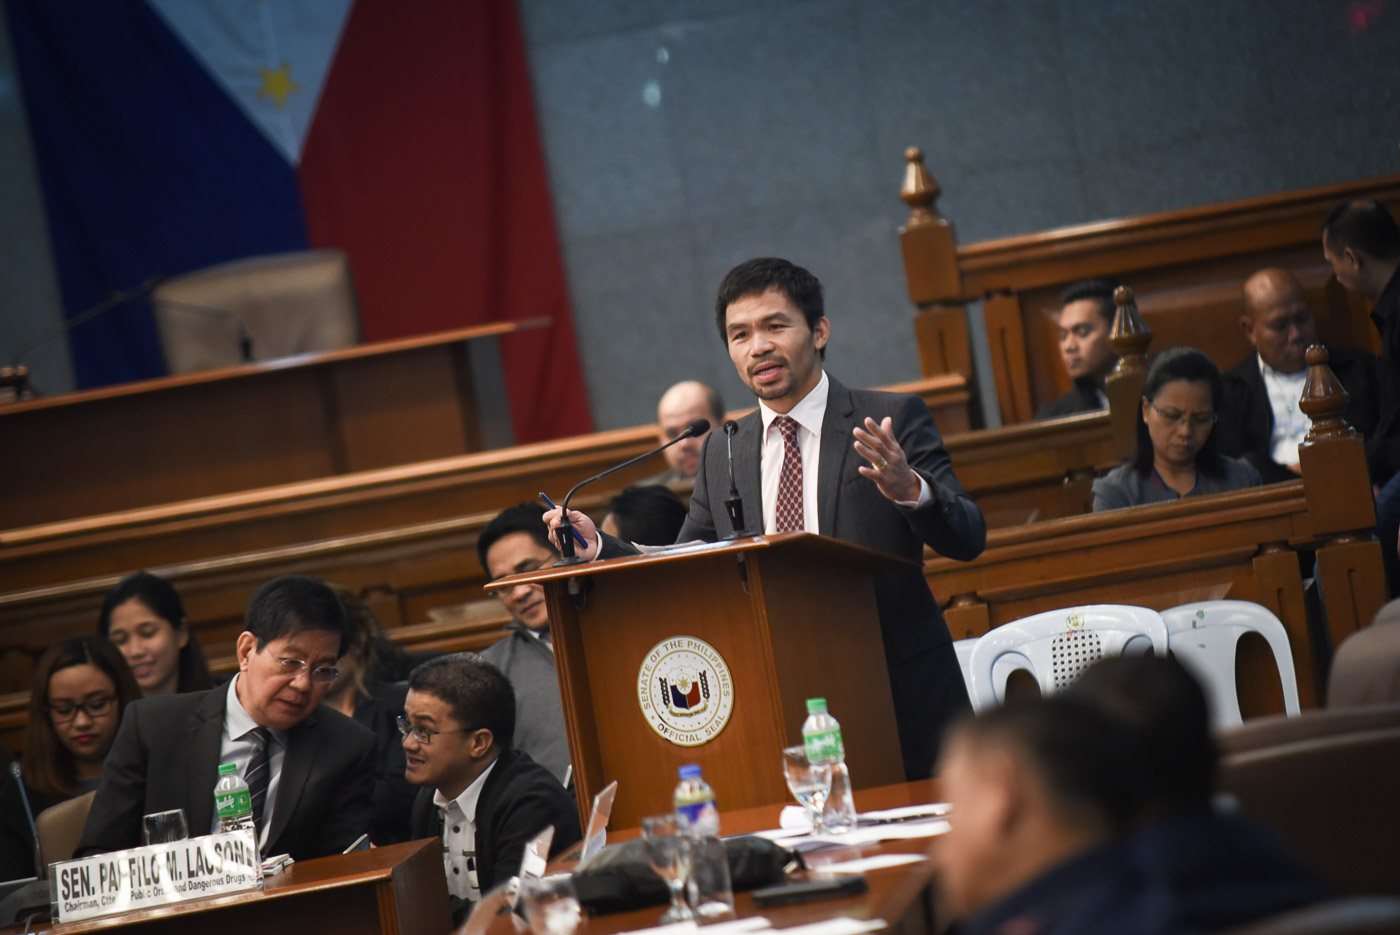 MEETING. Senators confirm meeting on February 26, 2017 at Senator Manny Pacquiao's house to plan the ouster of the Liberal Party senators from their key posts. File photo by LeAnne Jazul/Rappler 